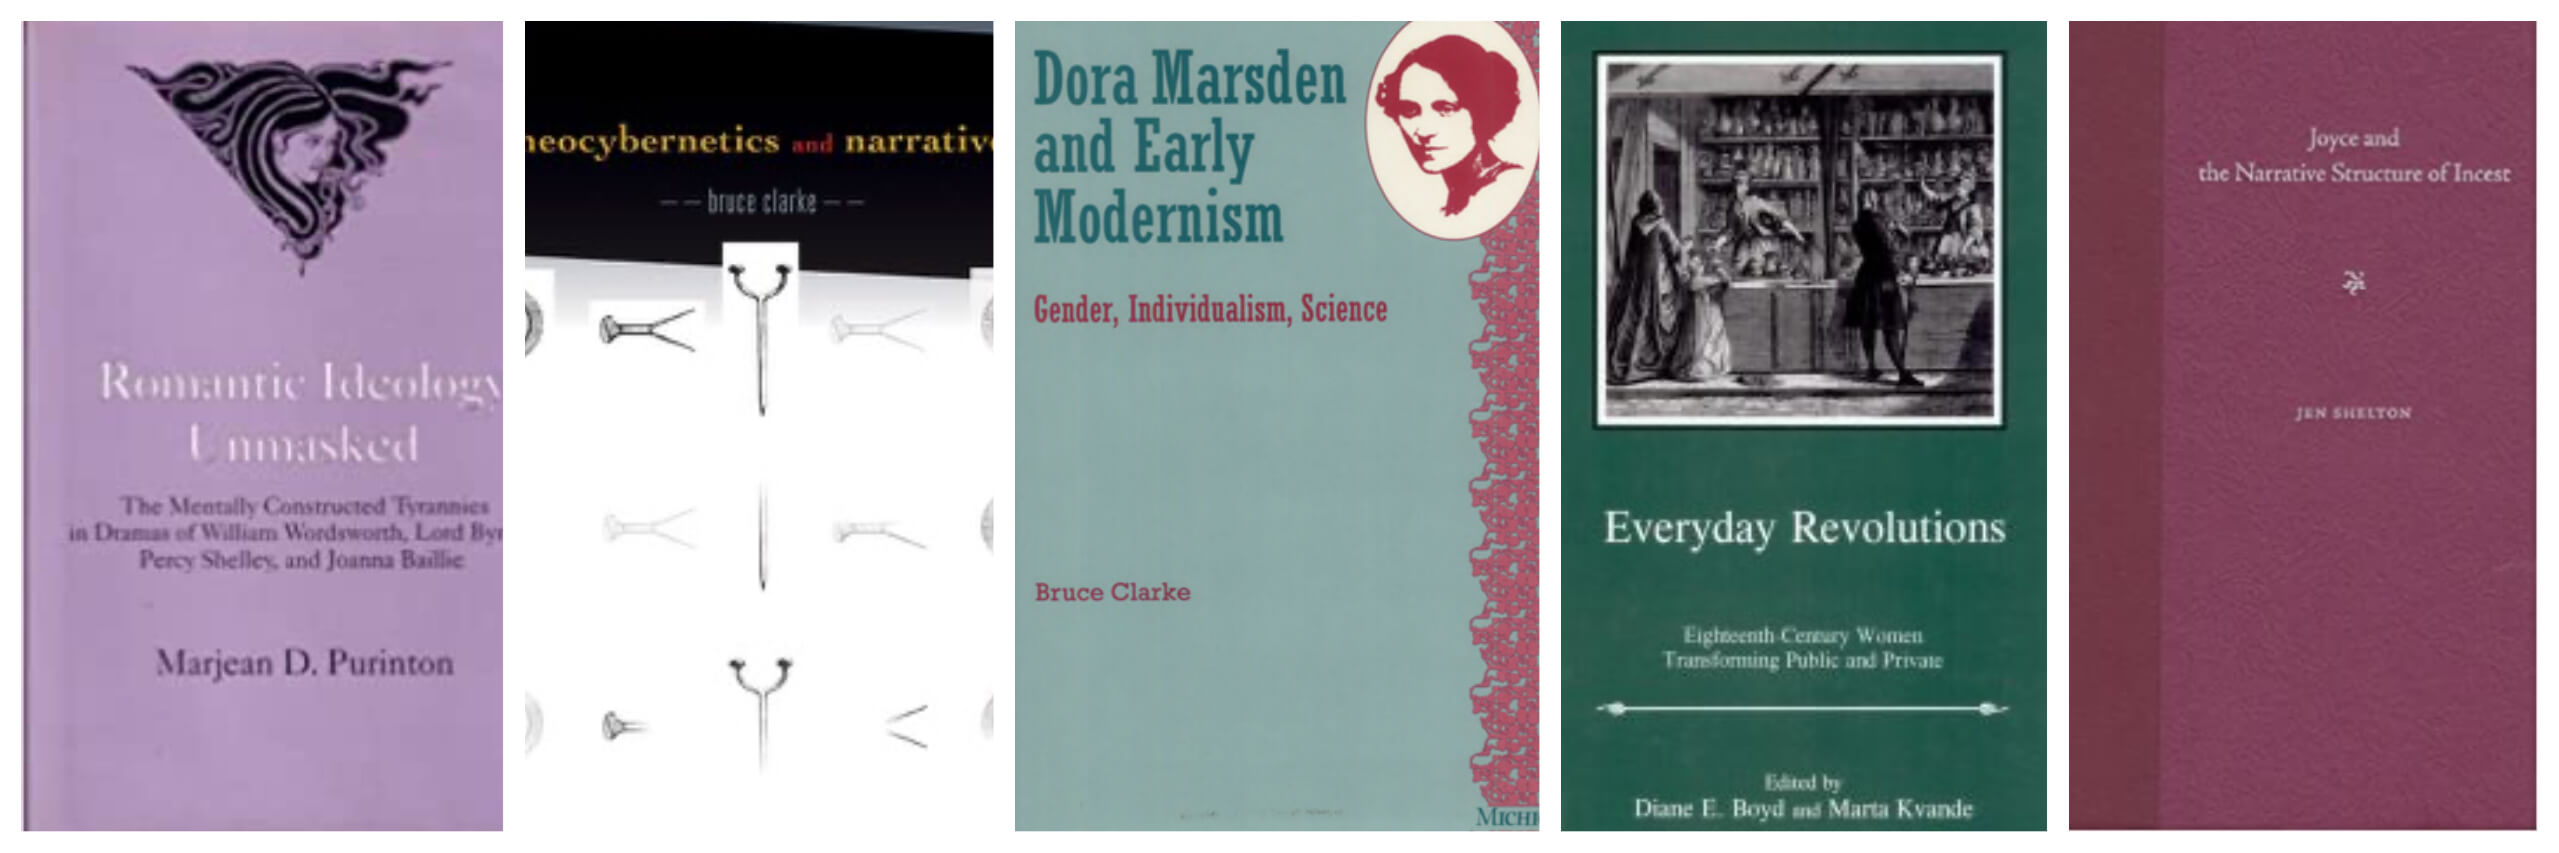 Covers of several books